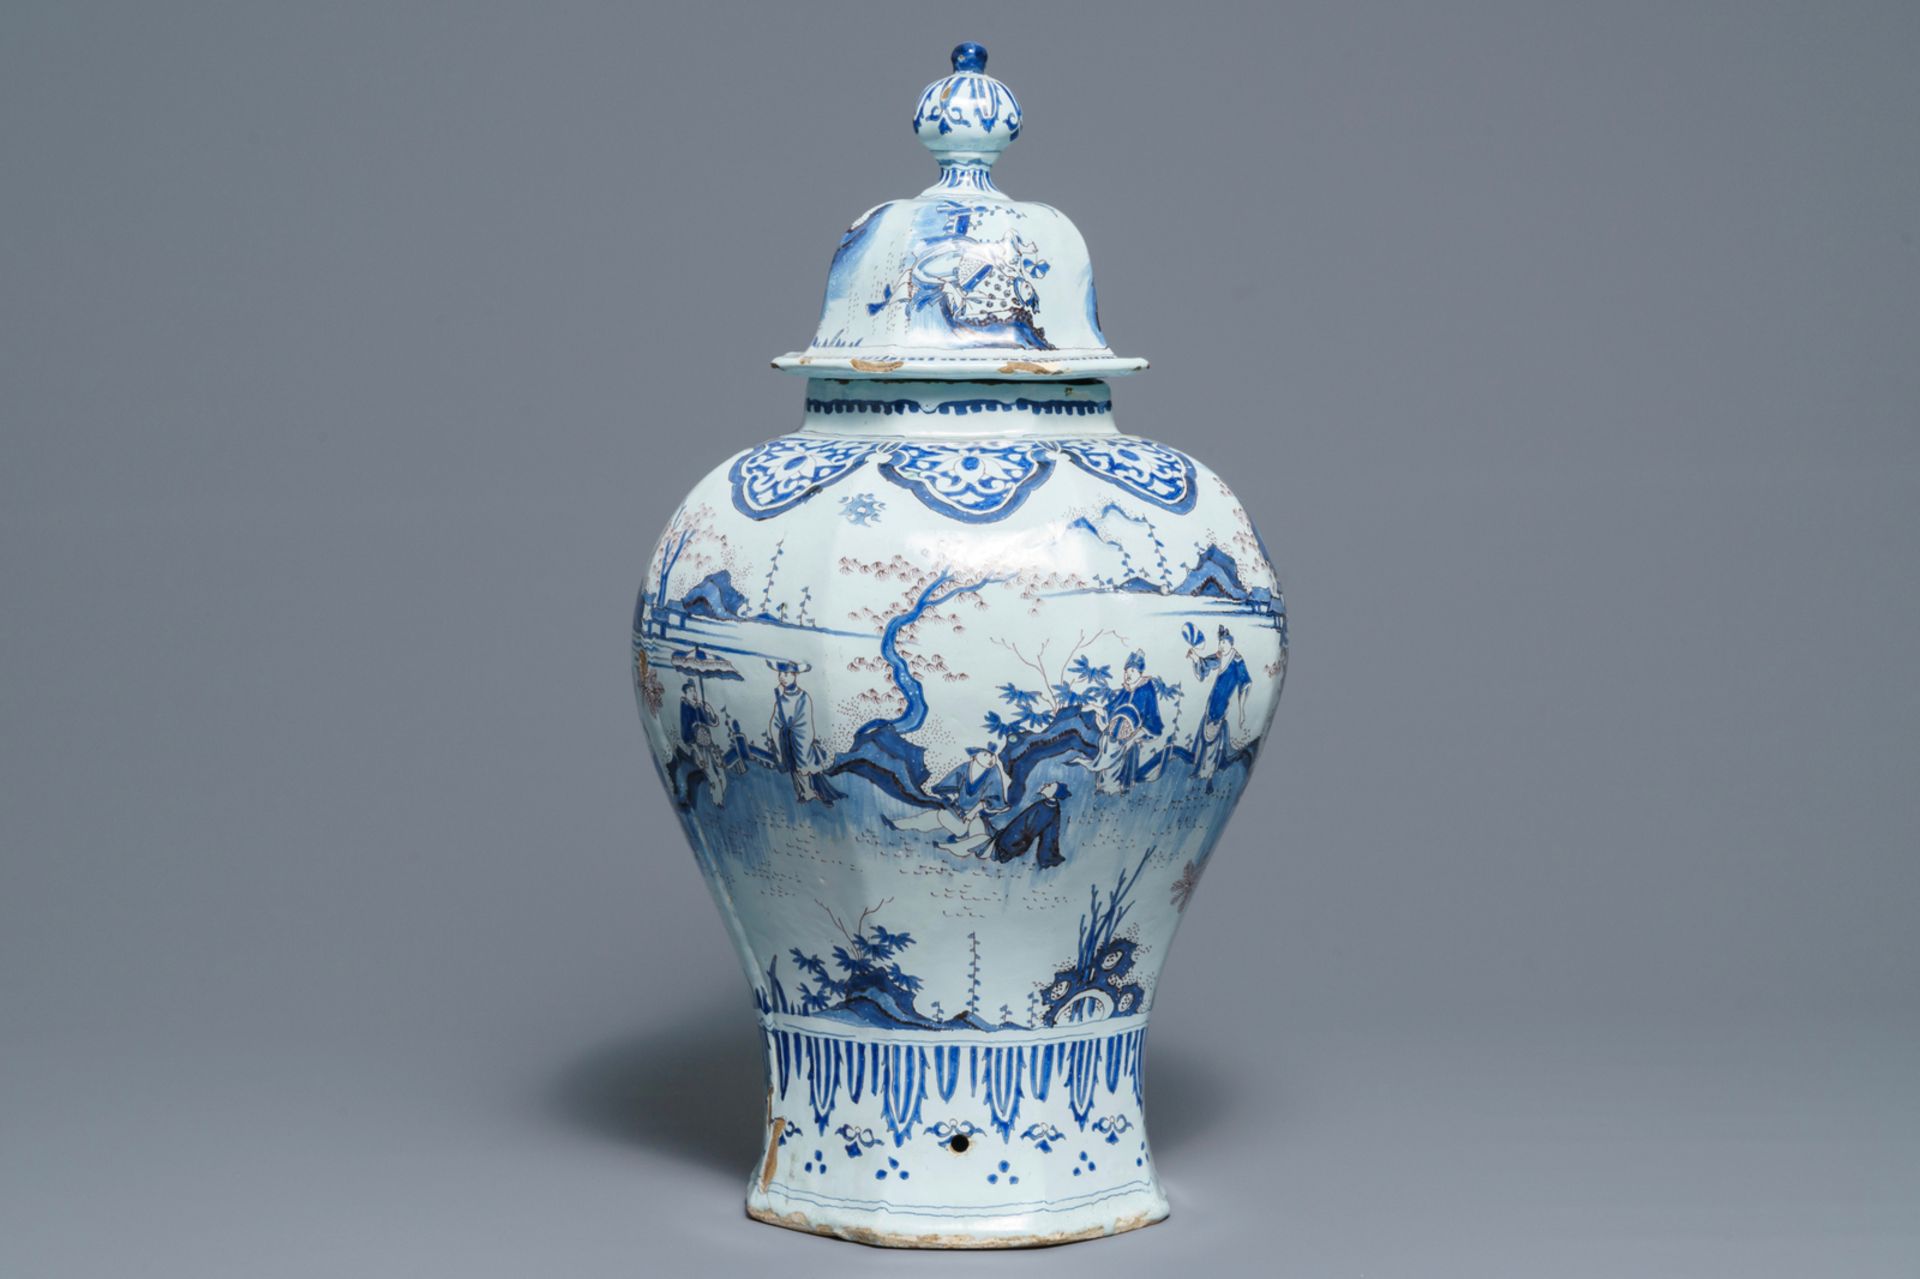 A large blue, white and manganese octagonal chinoiserie vase and cover, Nevers, 18th C. - Image 3 of 7